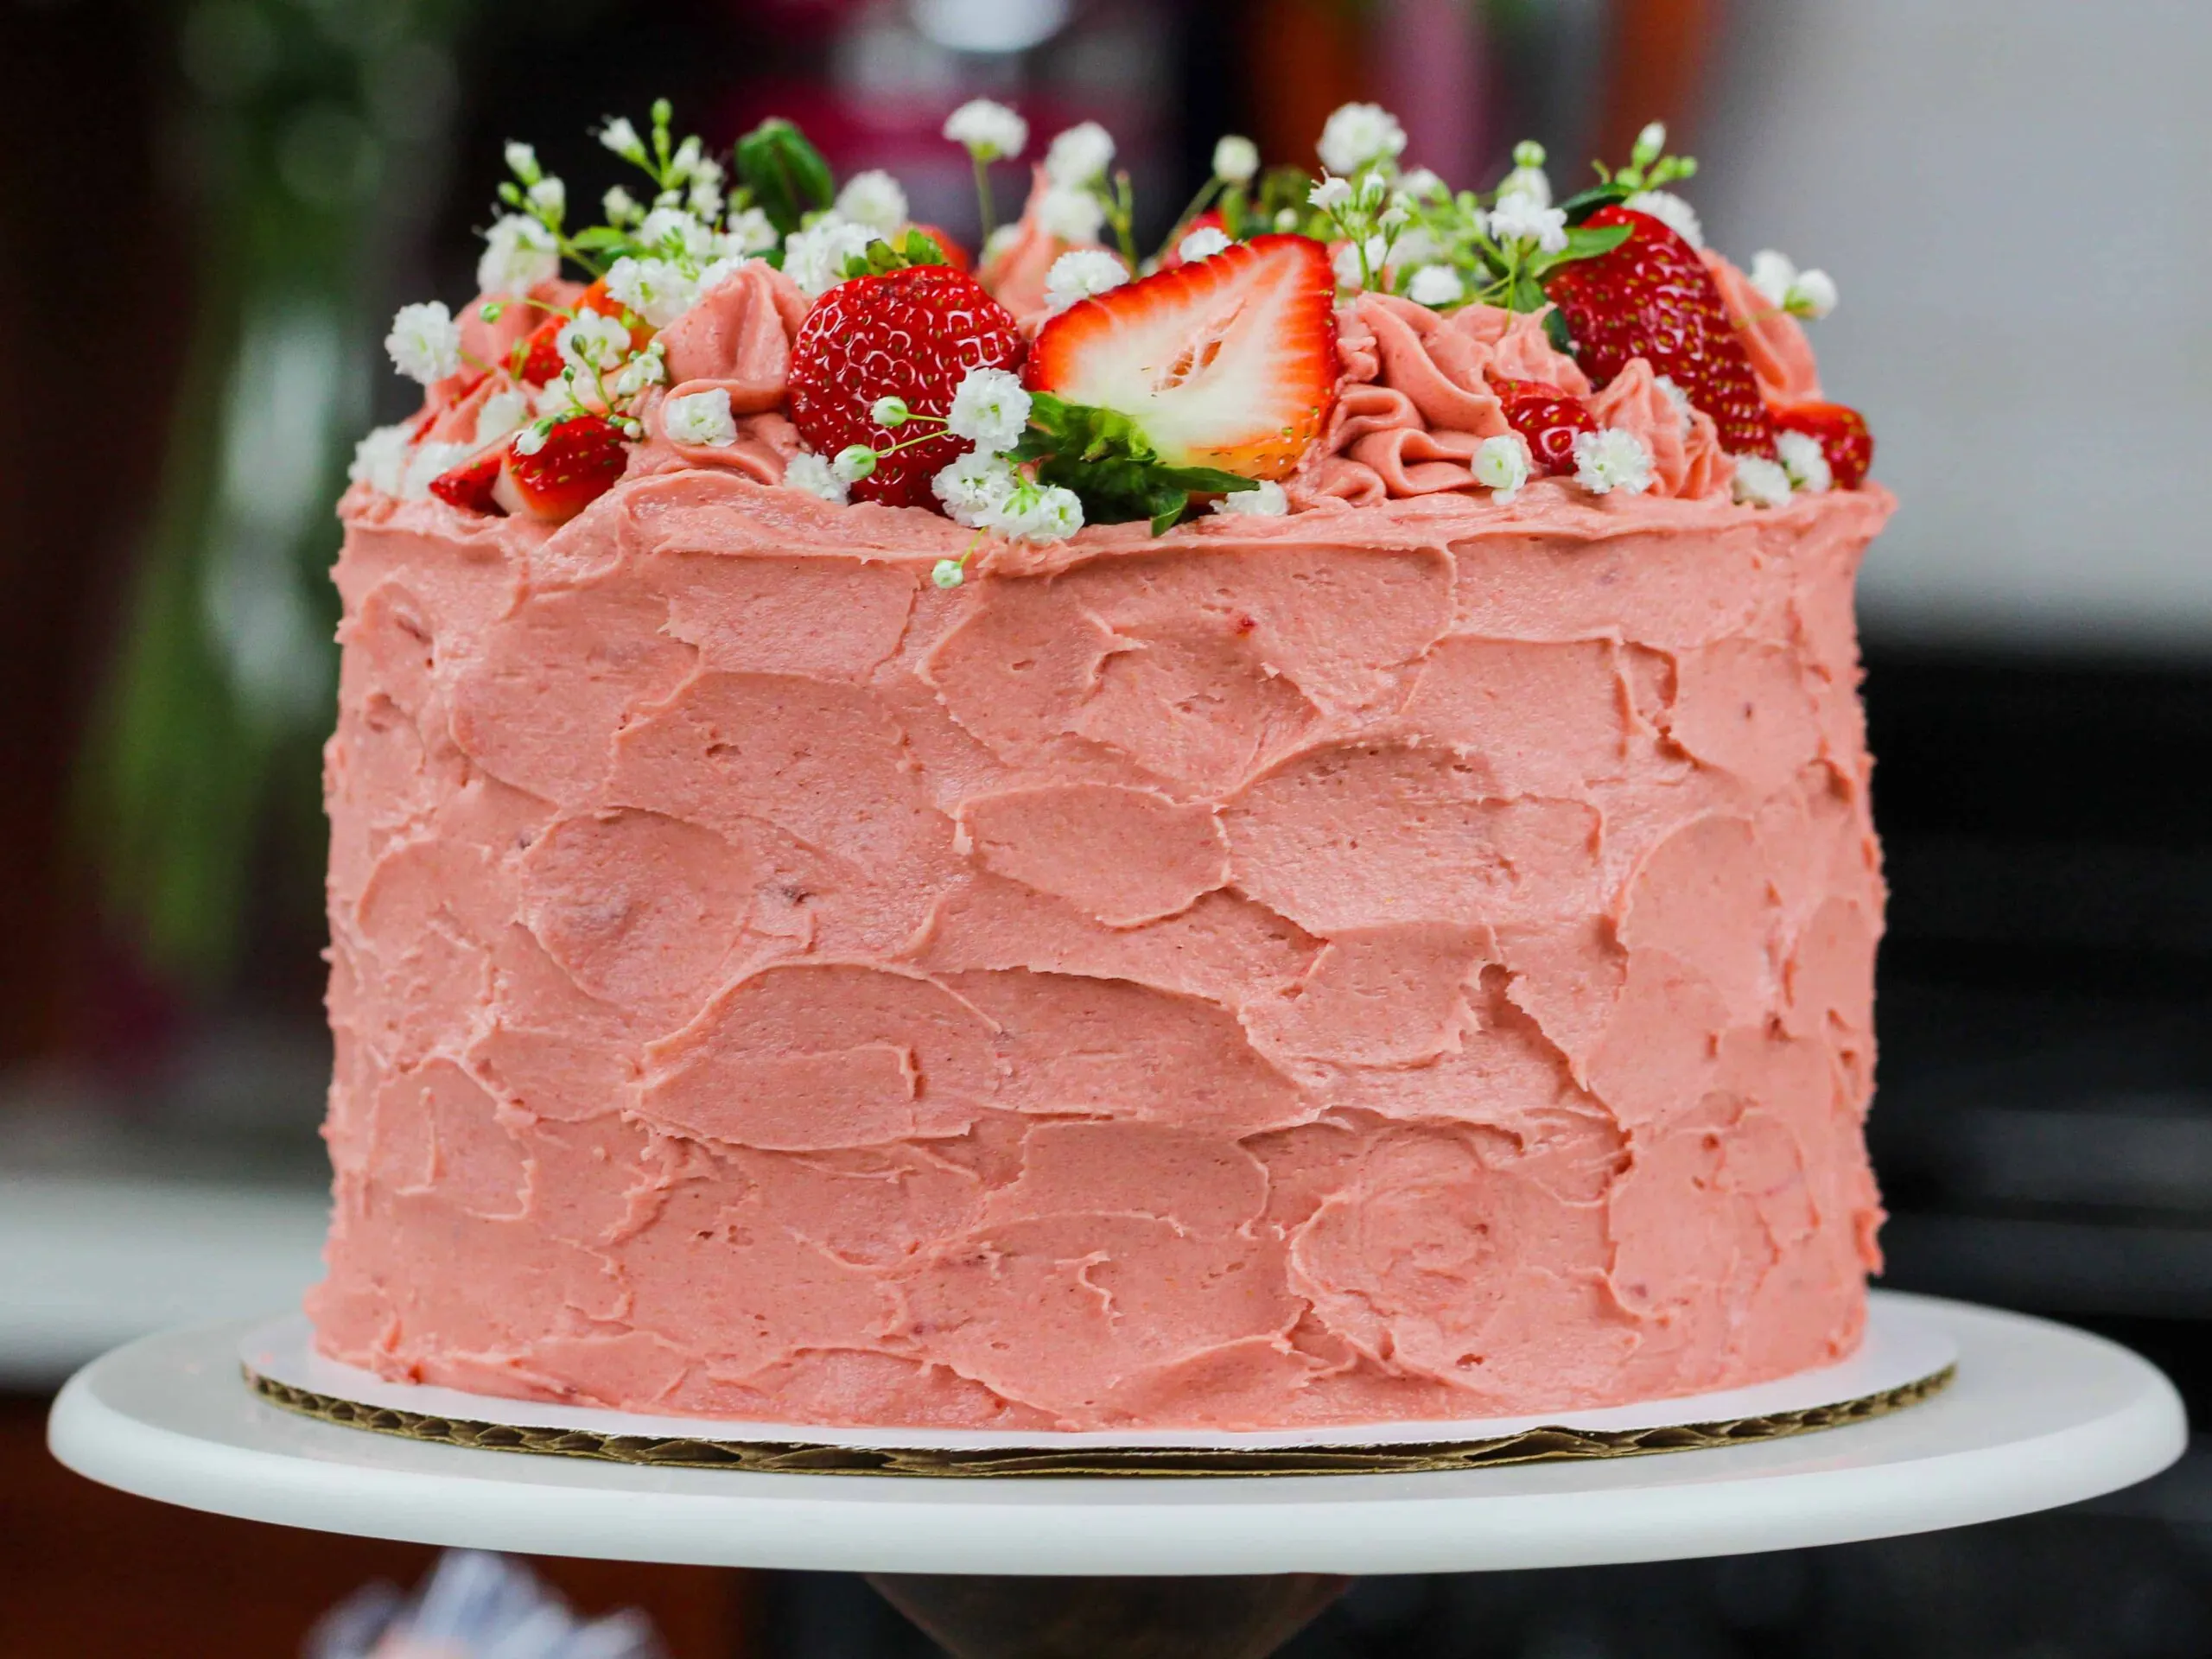 image of strawberry vanilla cake frosted with a real strawberry buttercream frosting